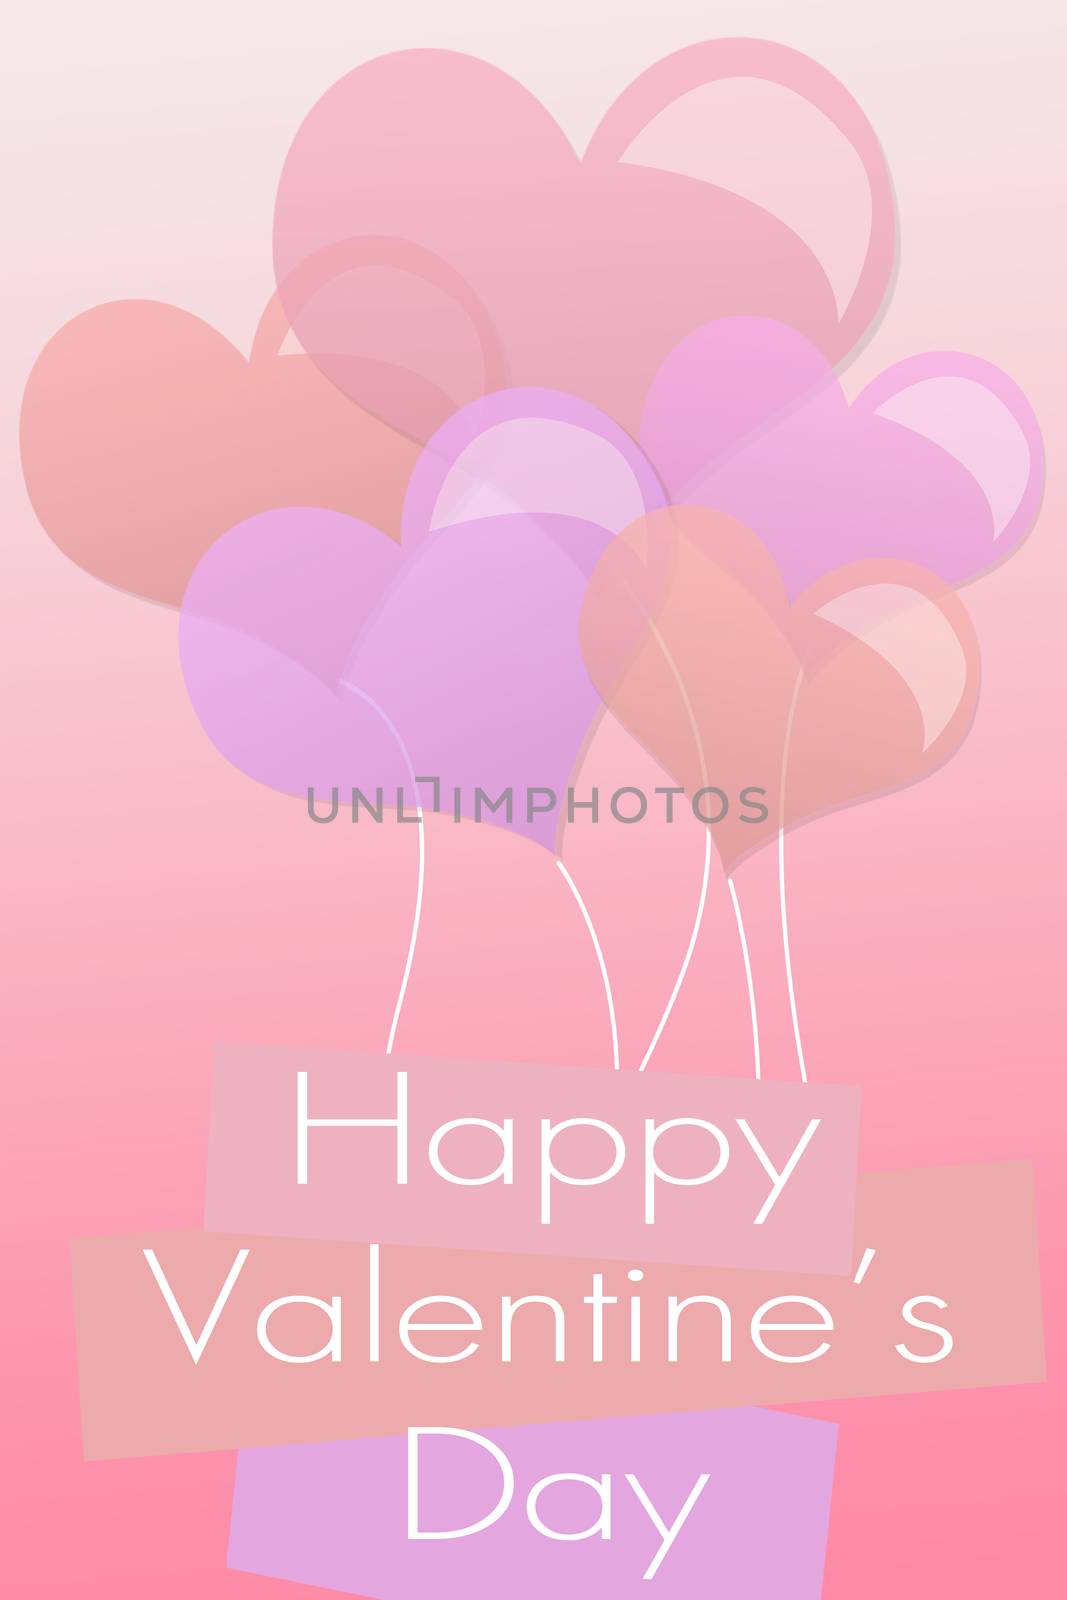 Valentine's day background with hearts by natali_brill